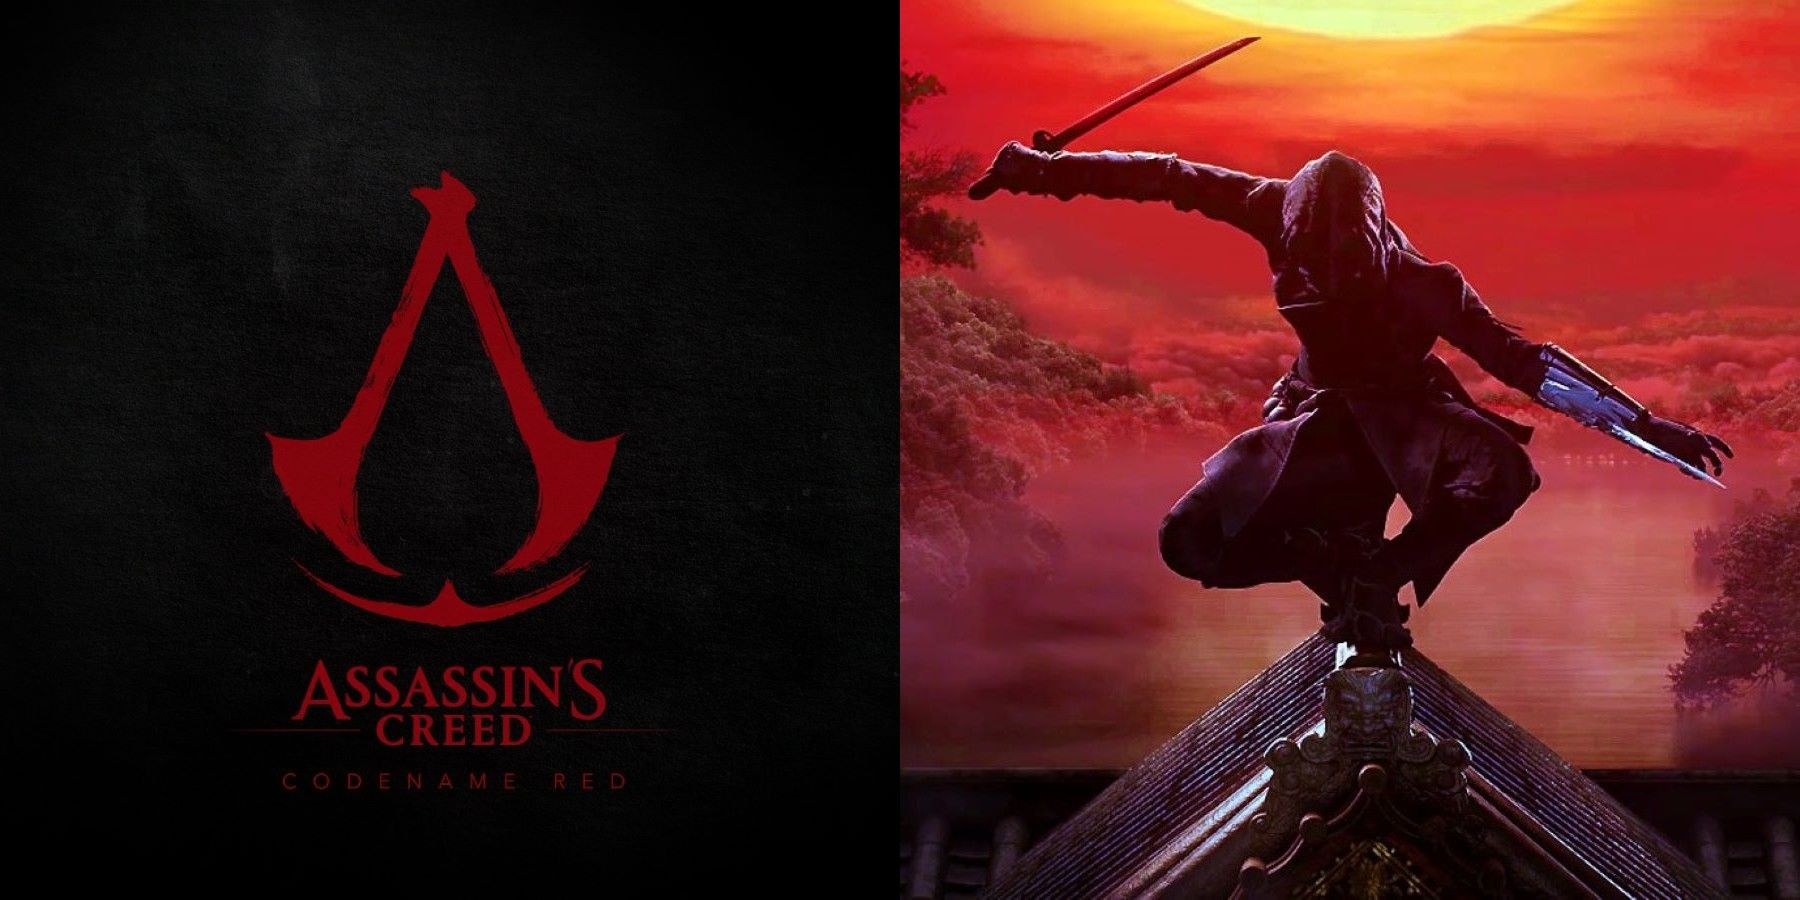 Assassins creed red дата выхода. Ассасин Крид ред. Assassins Creed Red Japan. Ассасин Крид Codename Red.